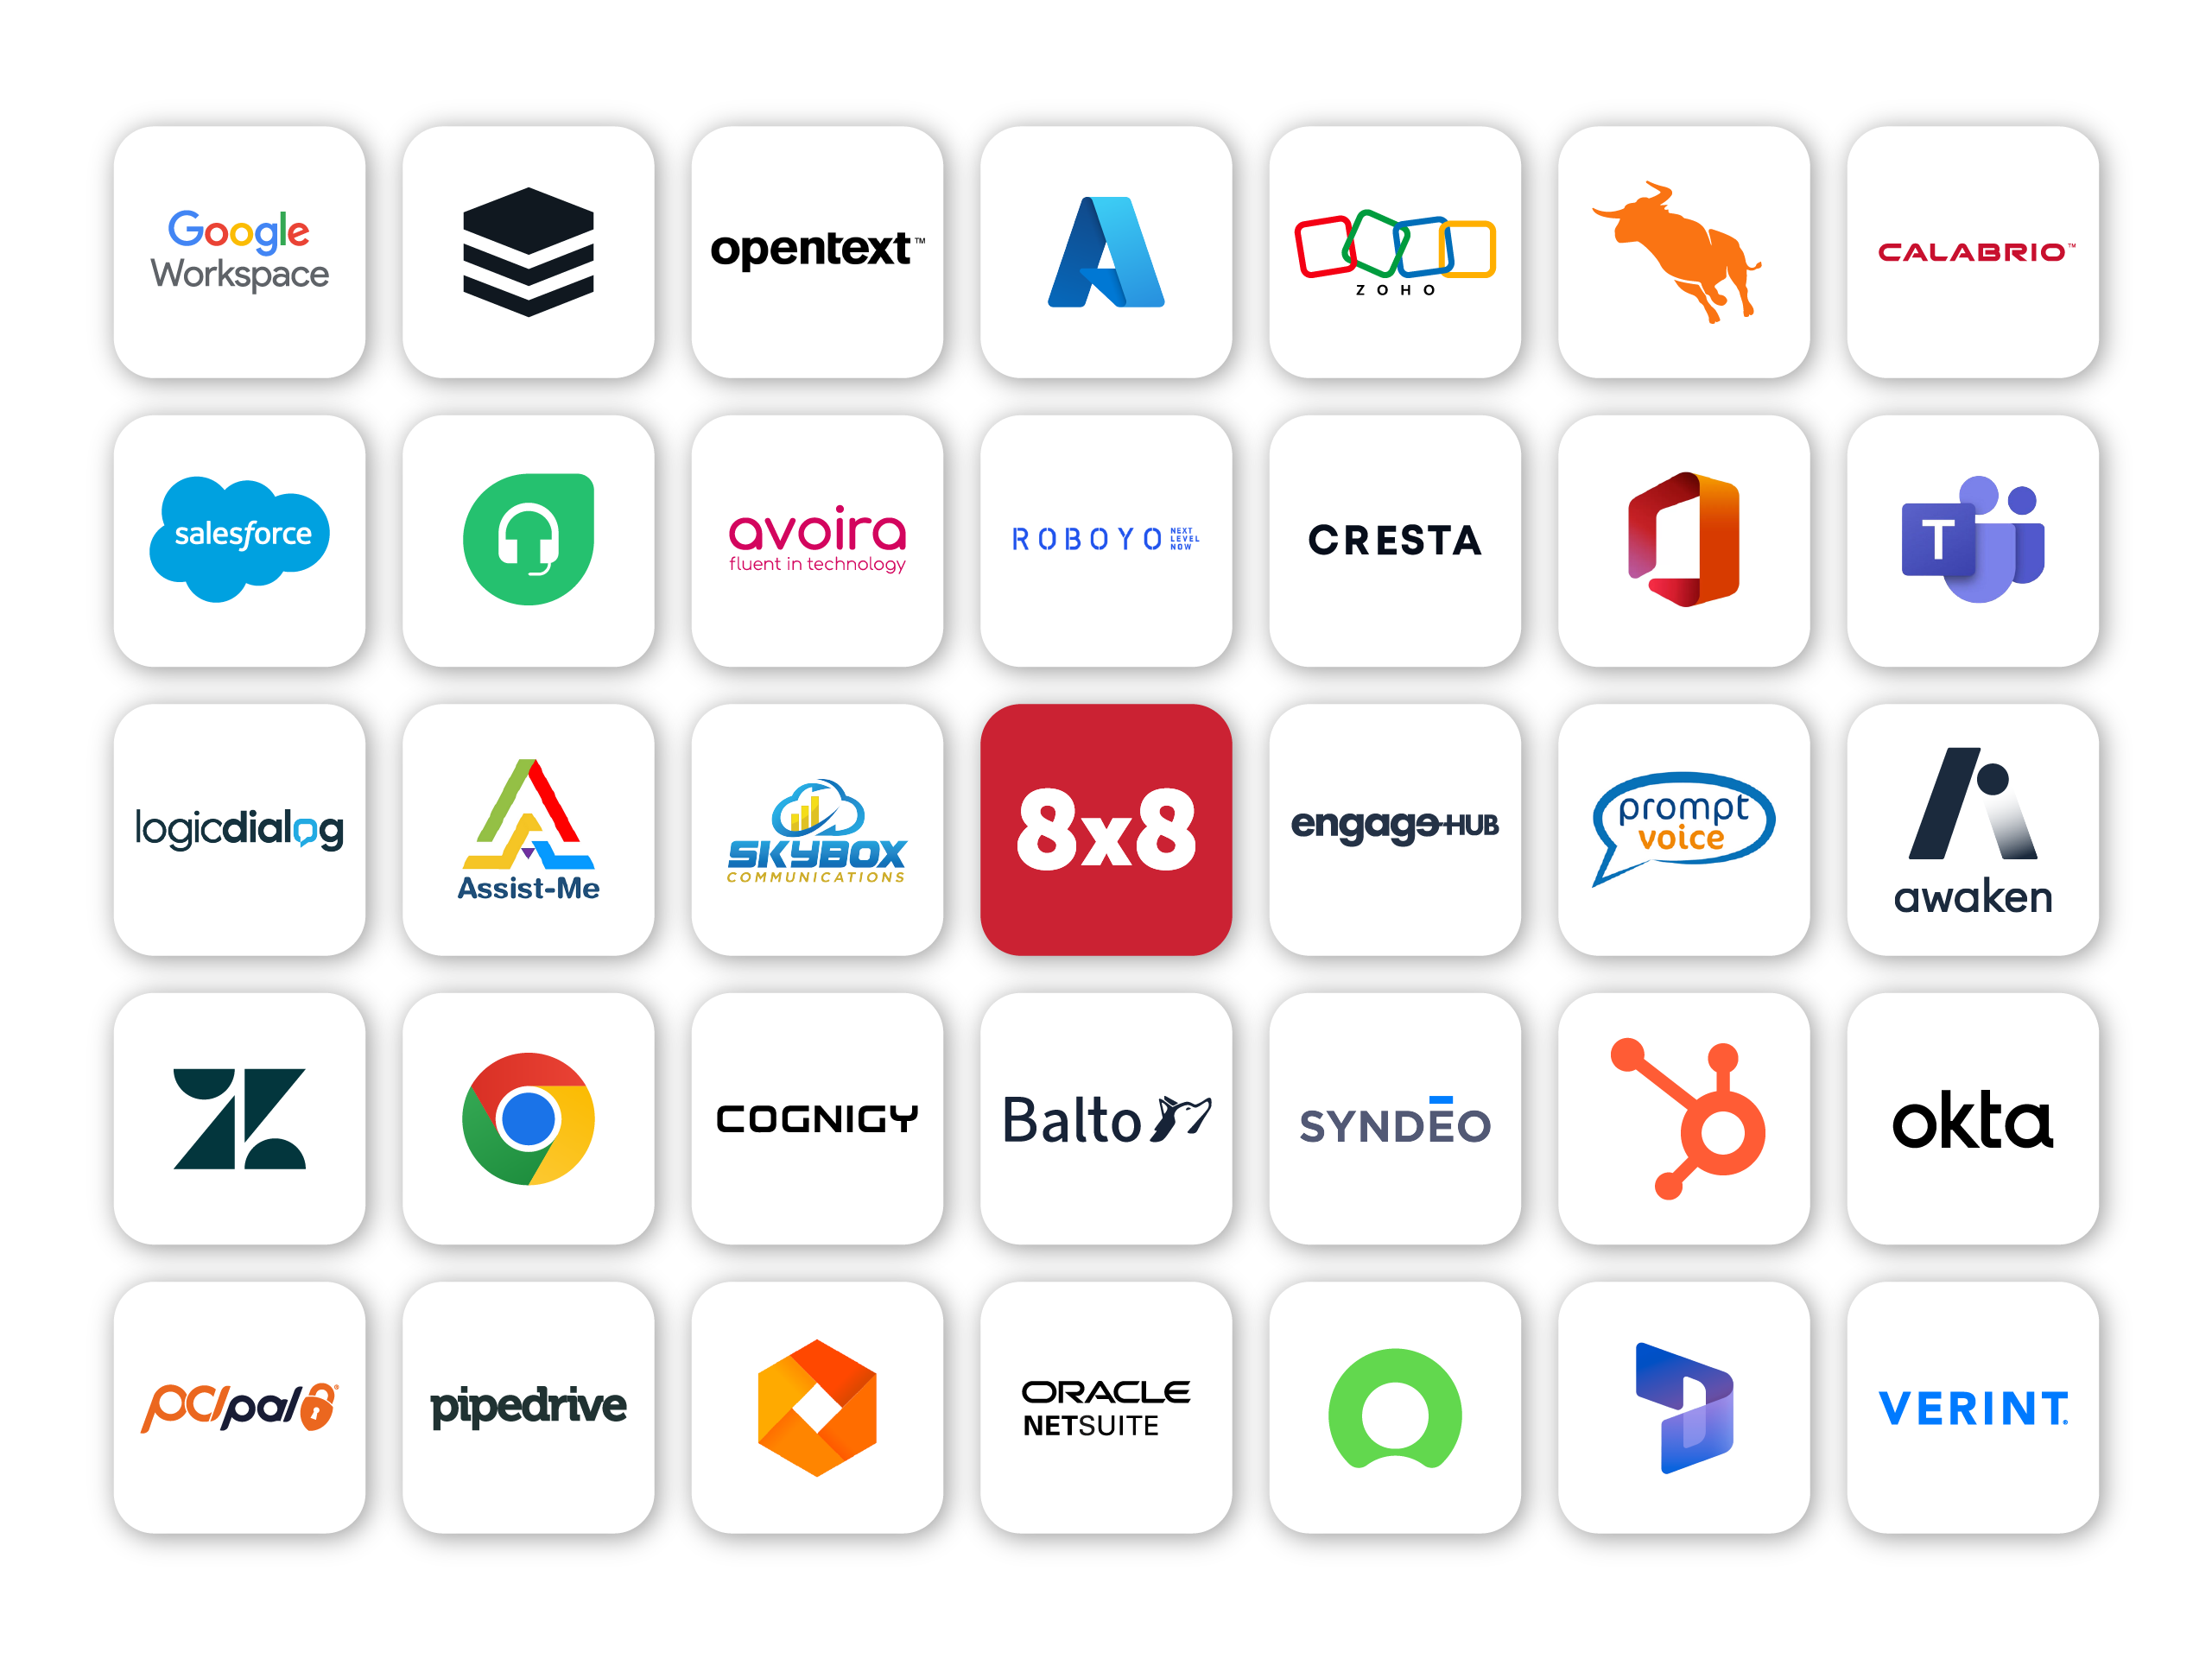 Icons listing current 8x8 Technology Partners